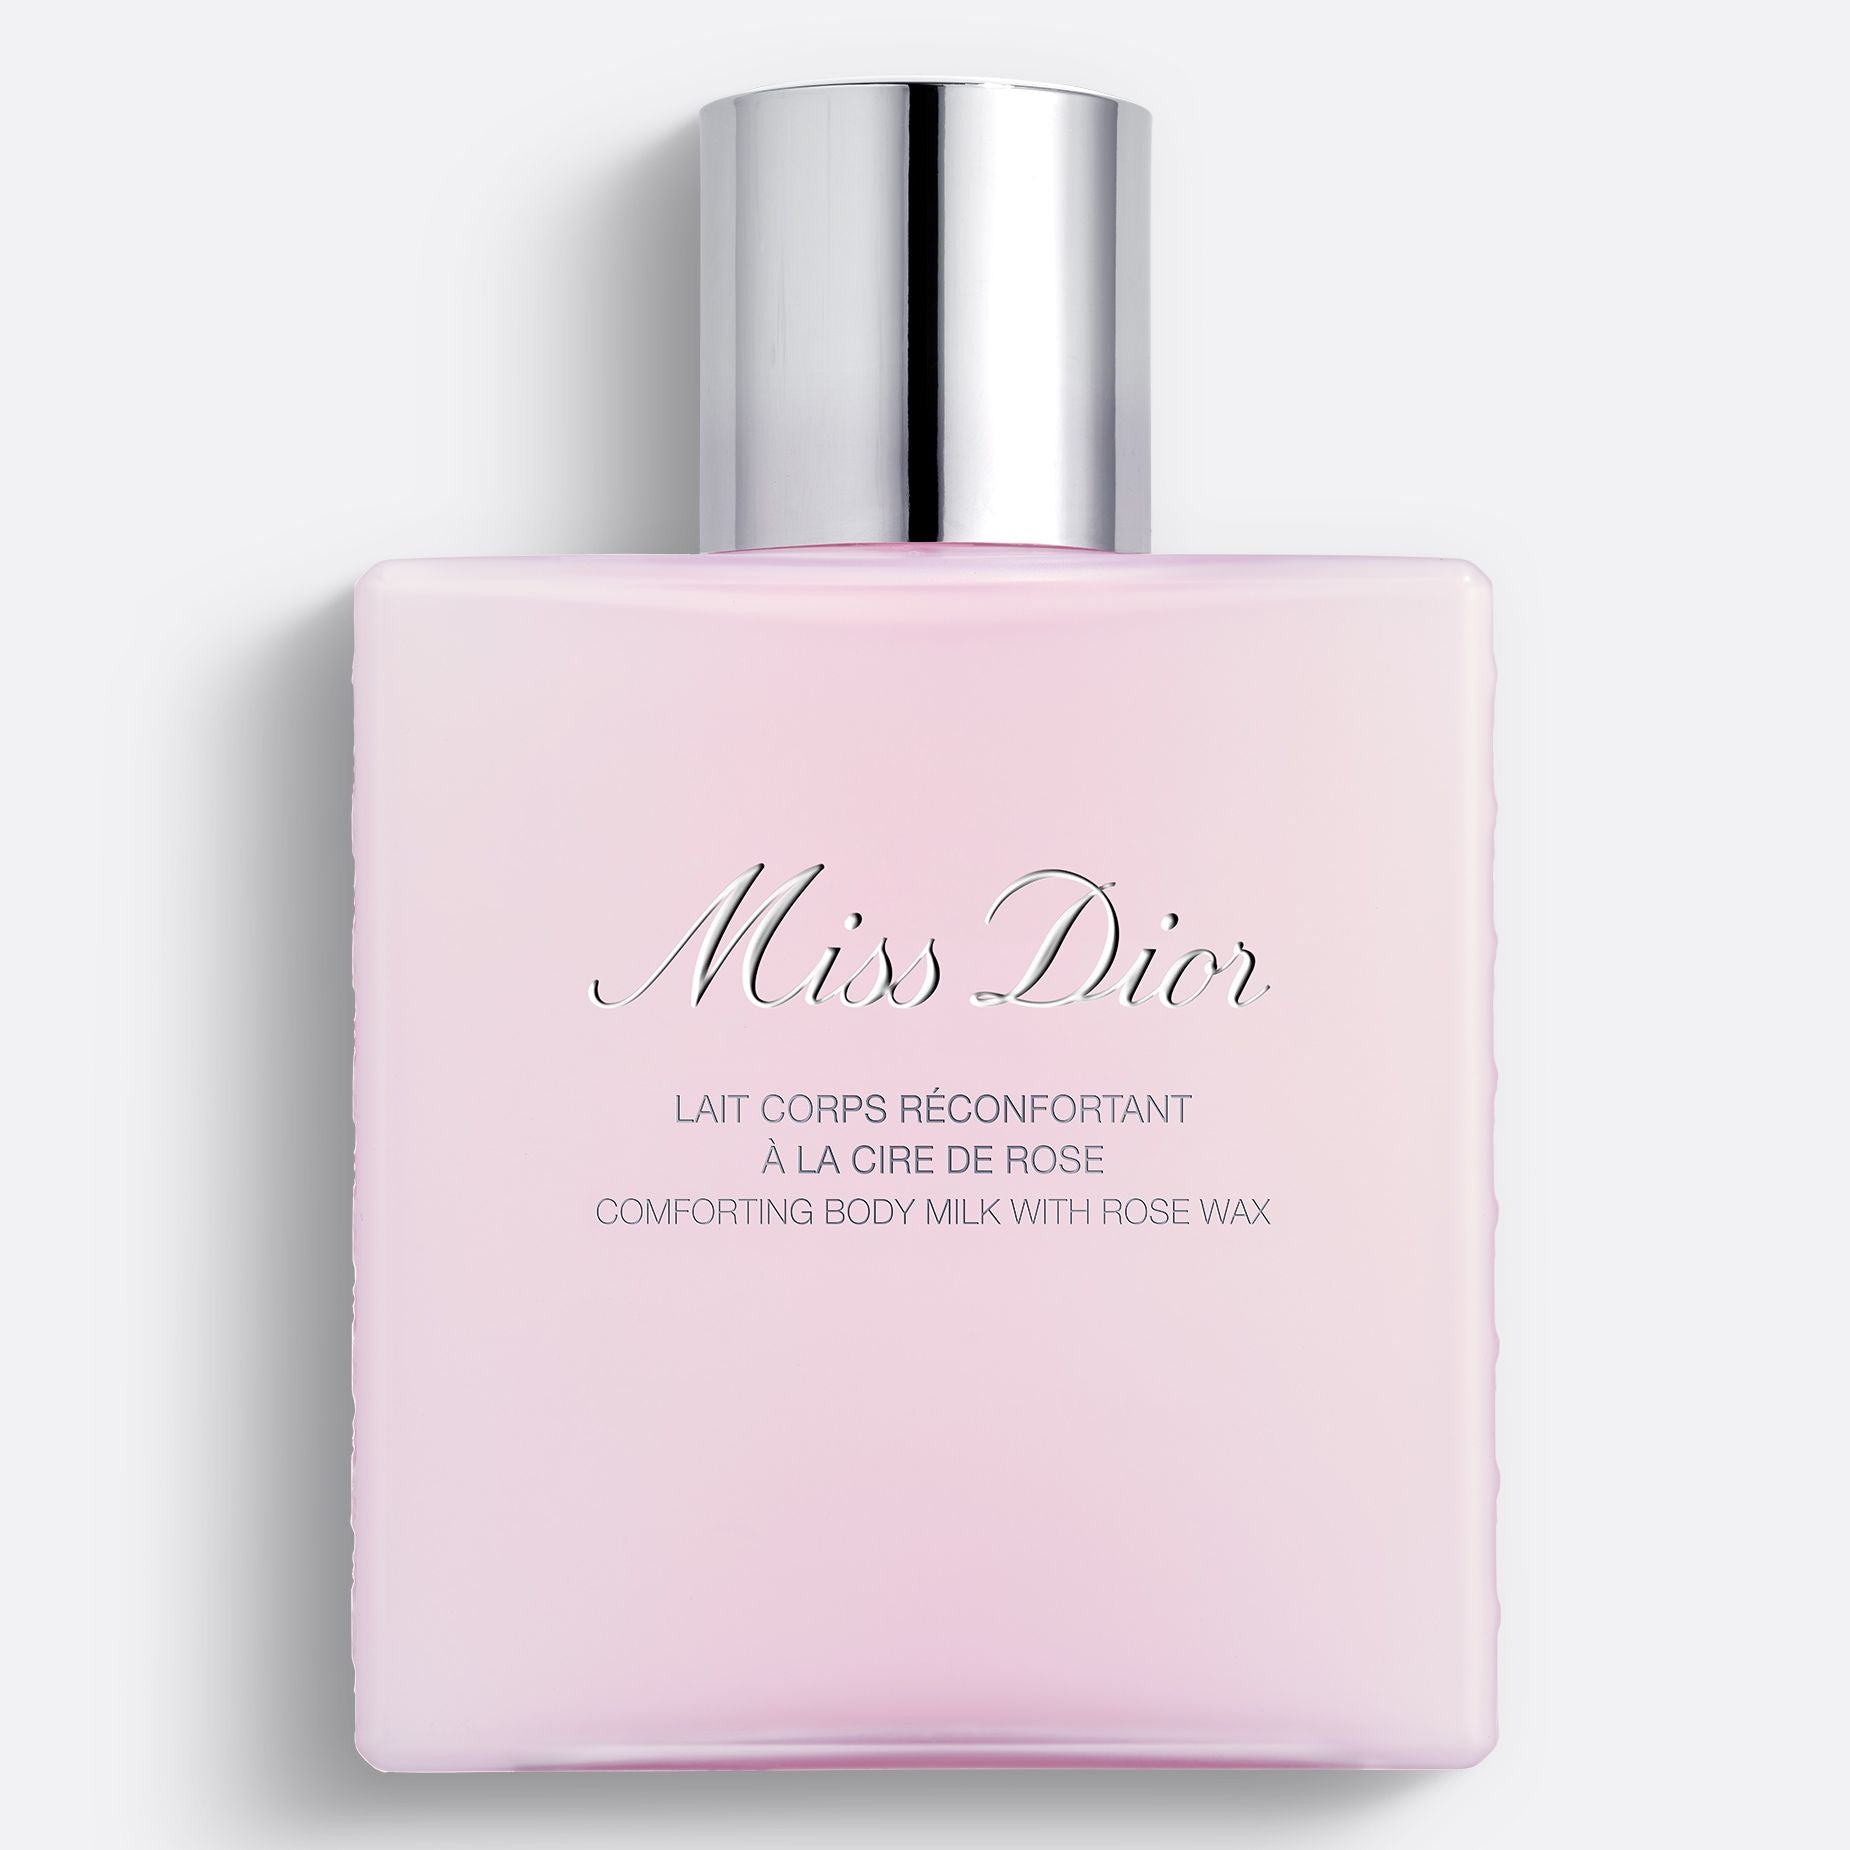 MISS DIOR COMFORTING BODY MILK WITH ROSE WAX ~ Hydrating Body Milk